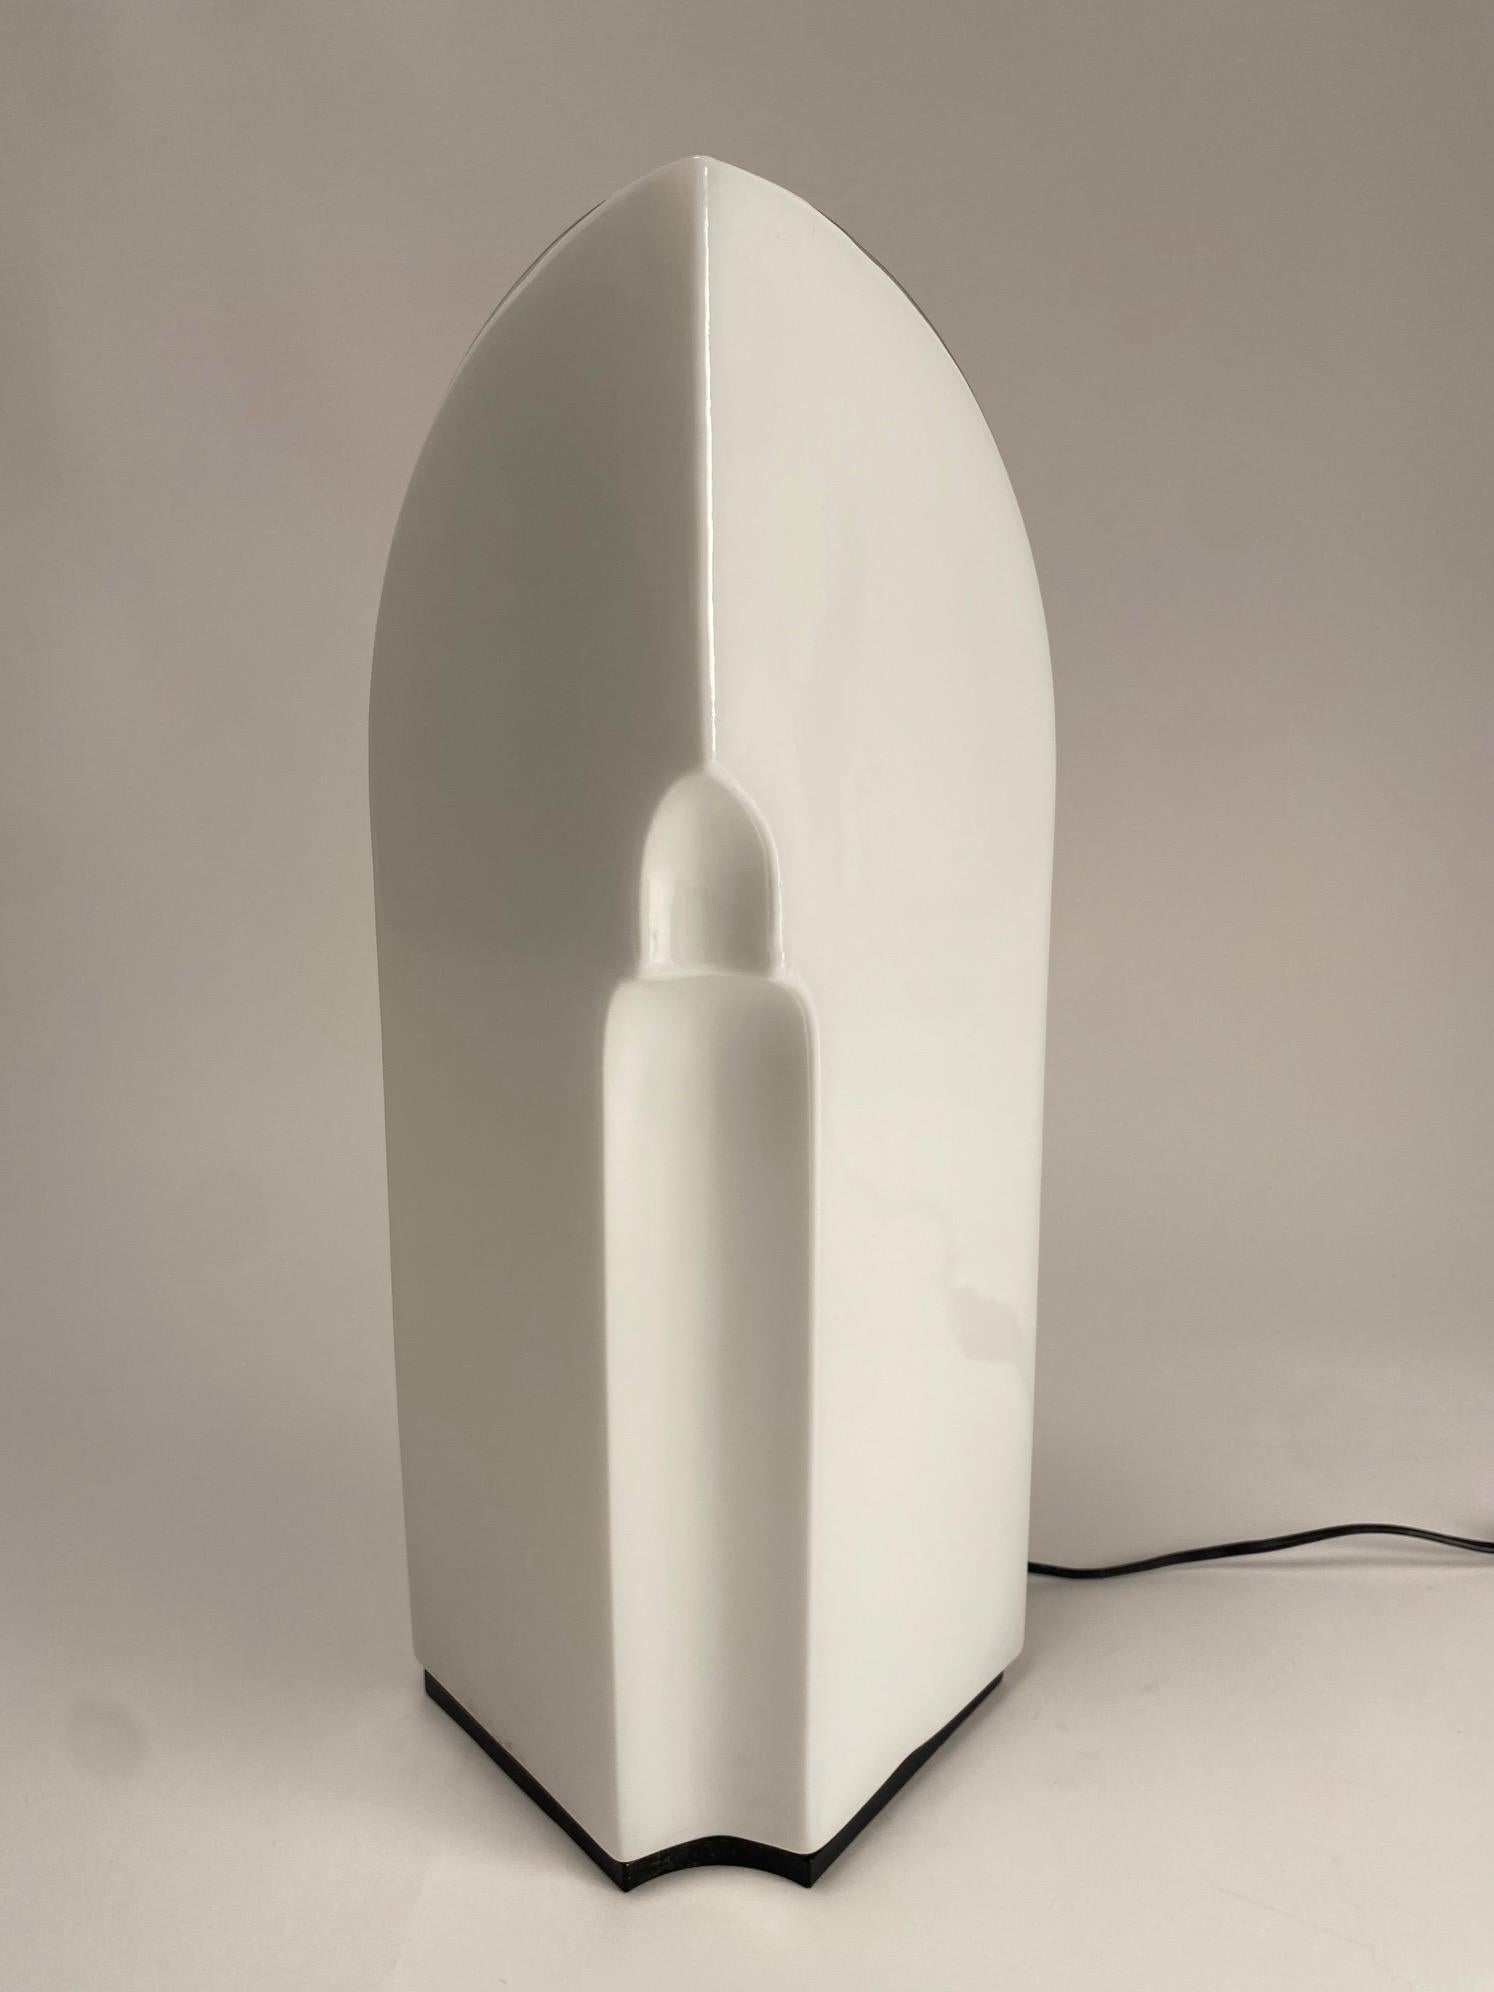 Tiki Table Lamp by Kazuhide Takahama for Leucos, Italy 1980s (Big size model) In Good Condition For Sale In Argelato, BO